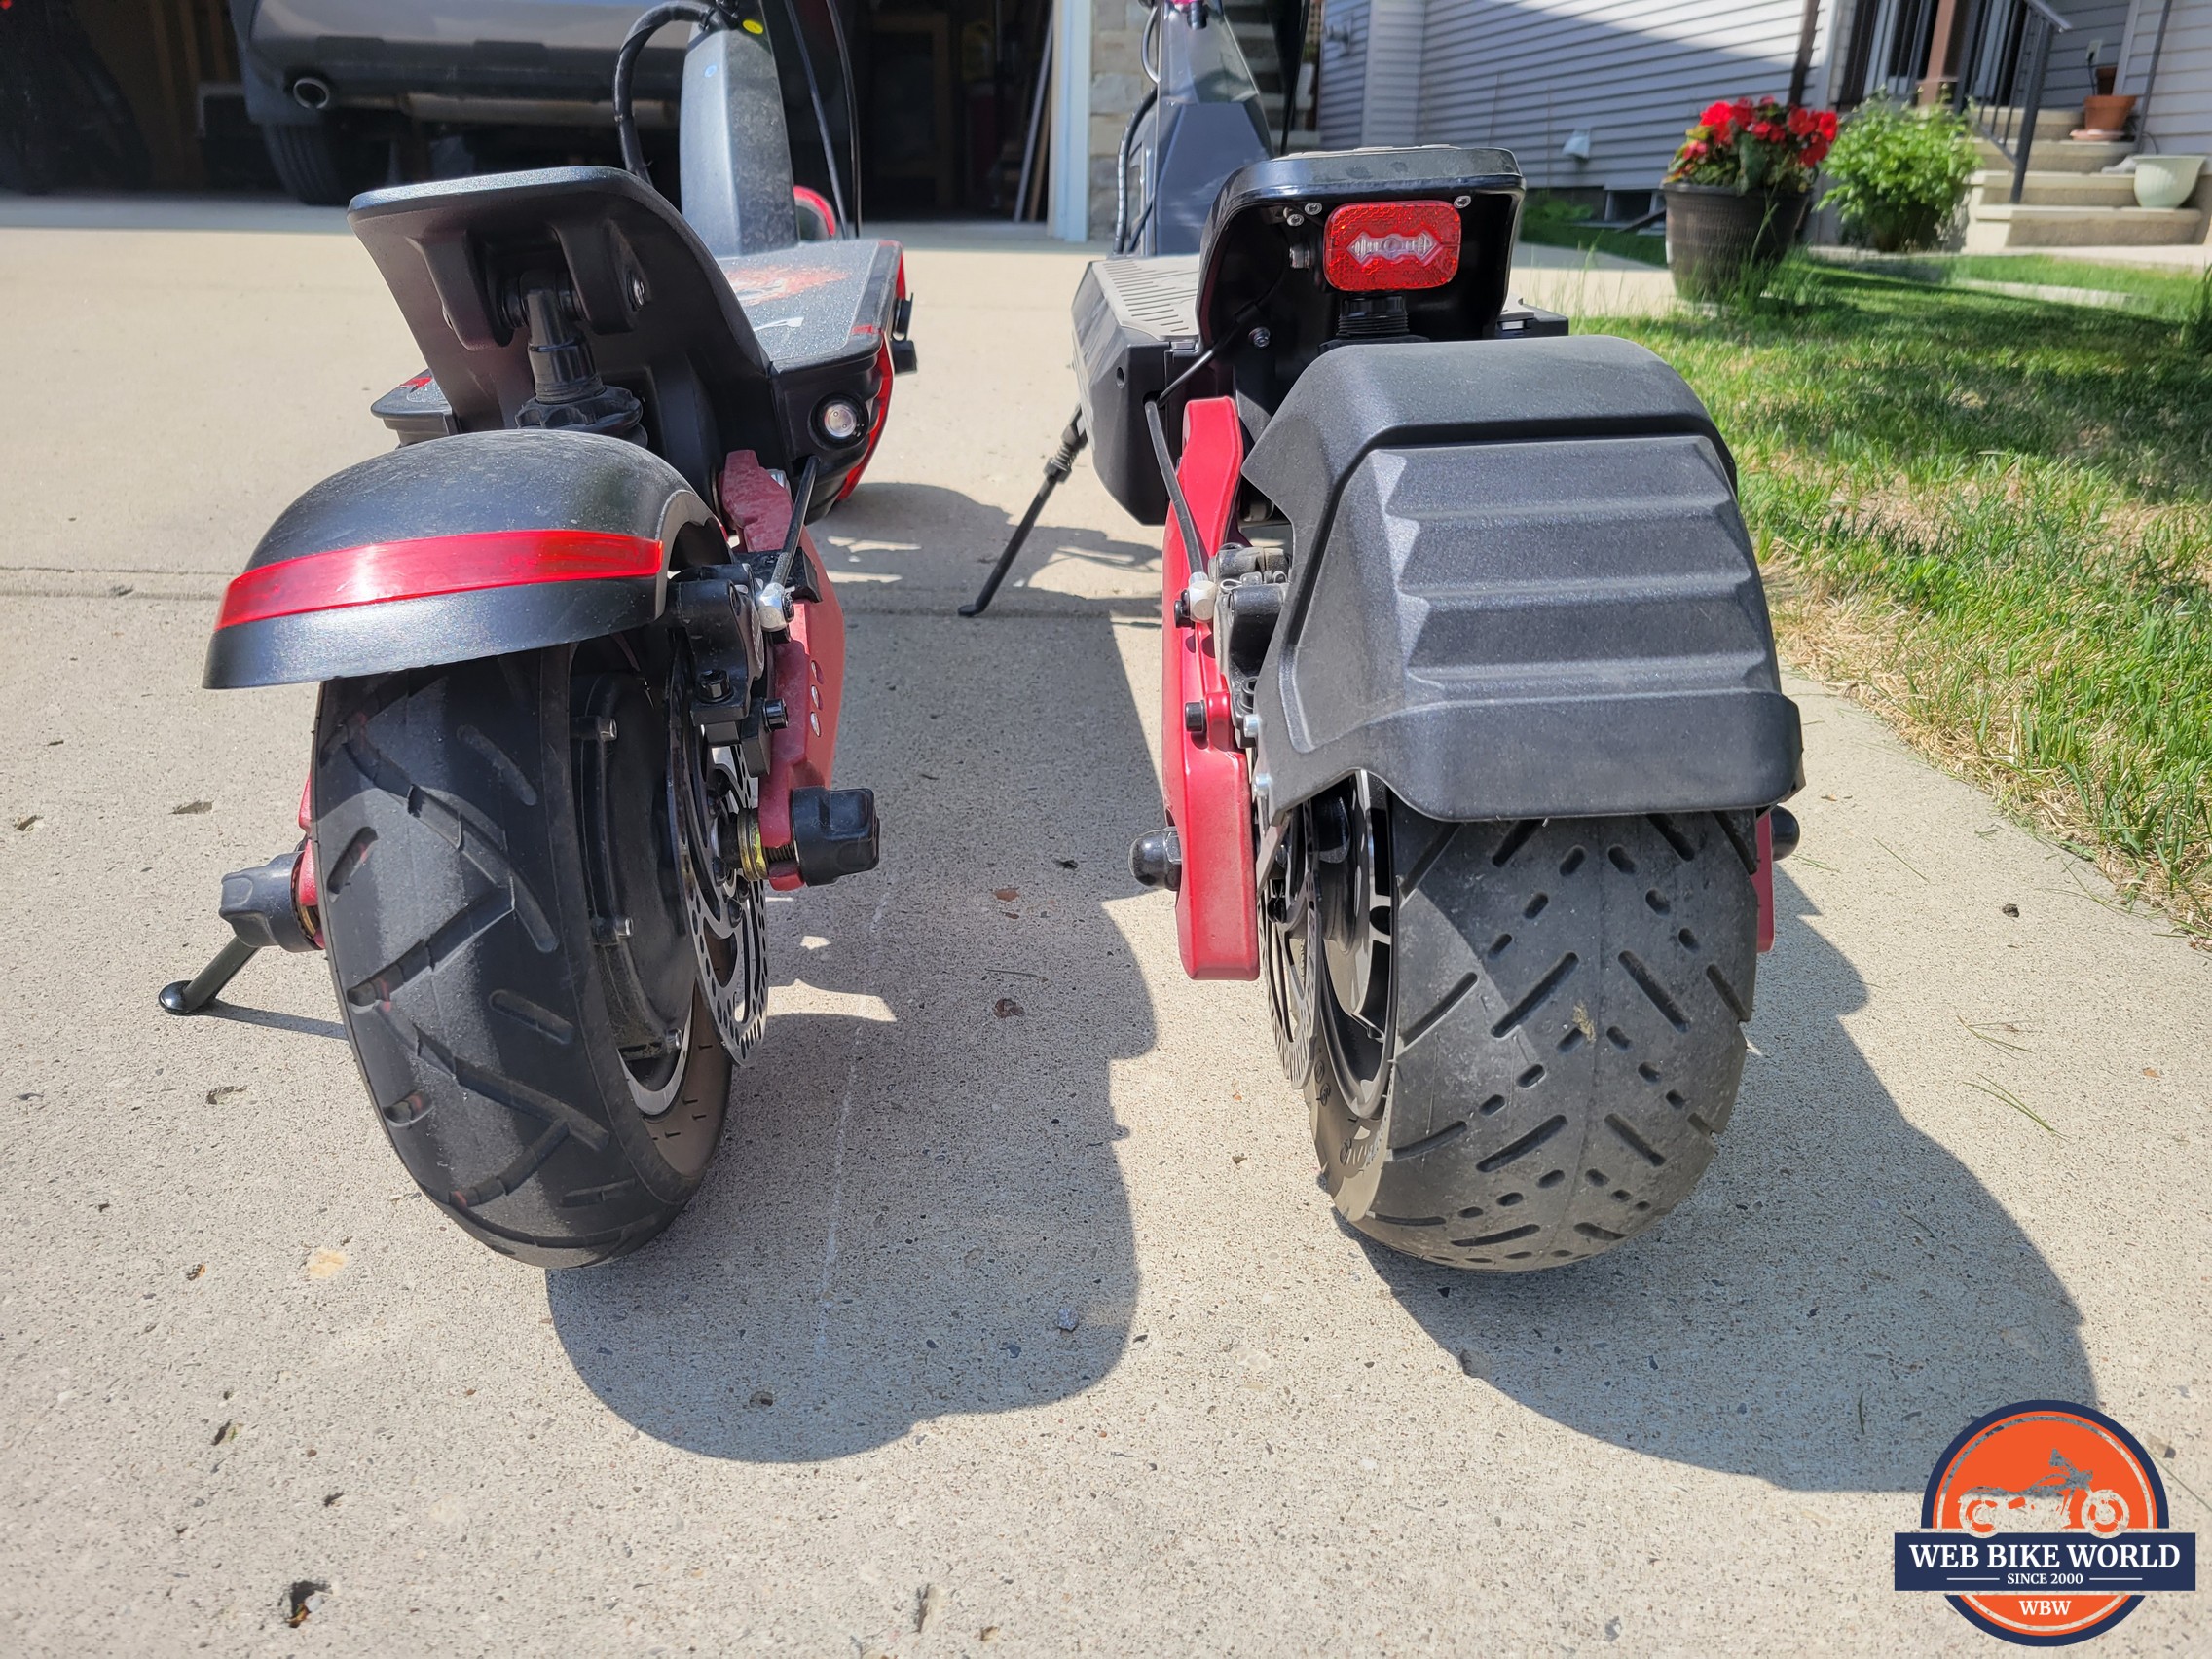 The Eagle One tires (left) are slightly slimmer than the Eagle One Pro (right).